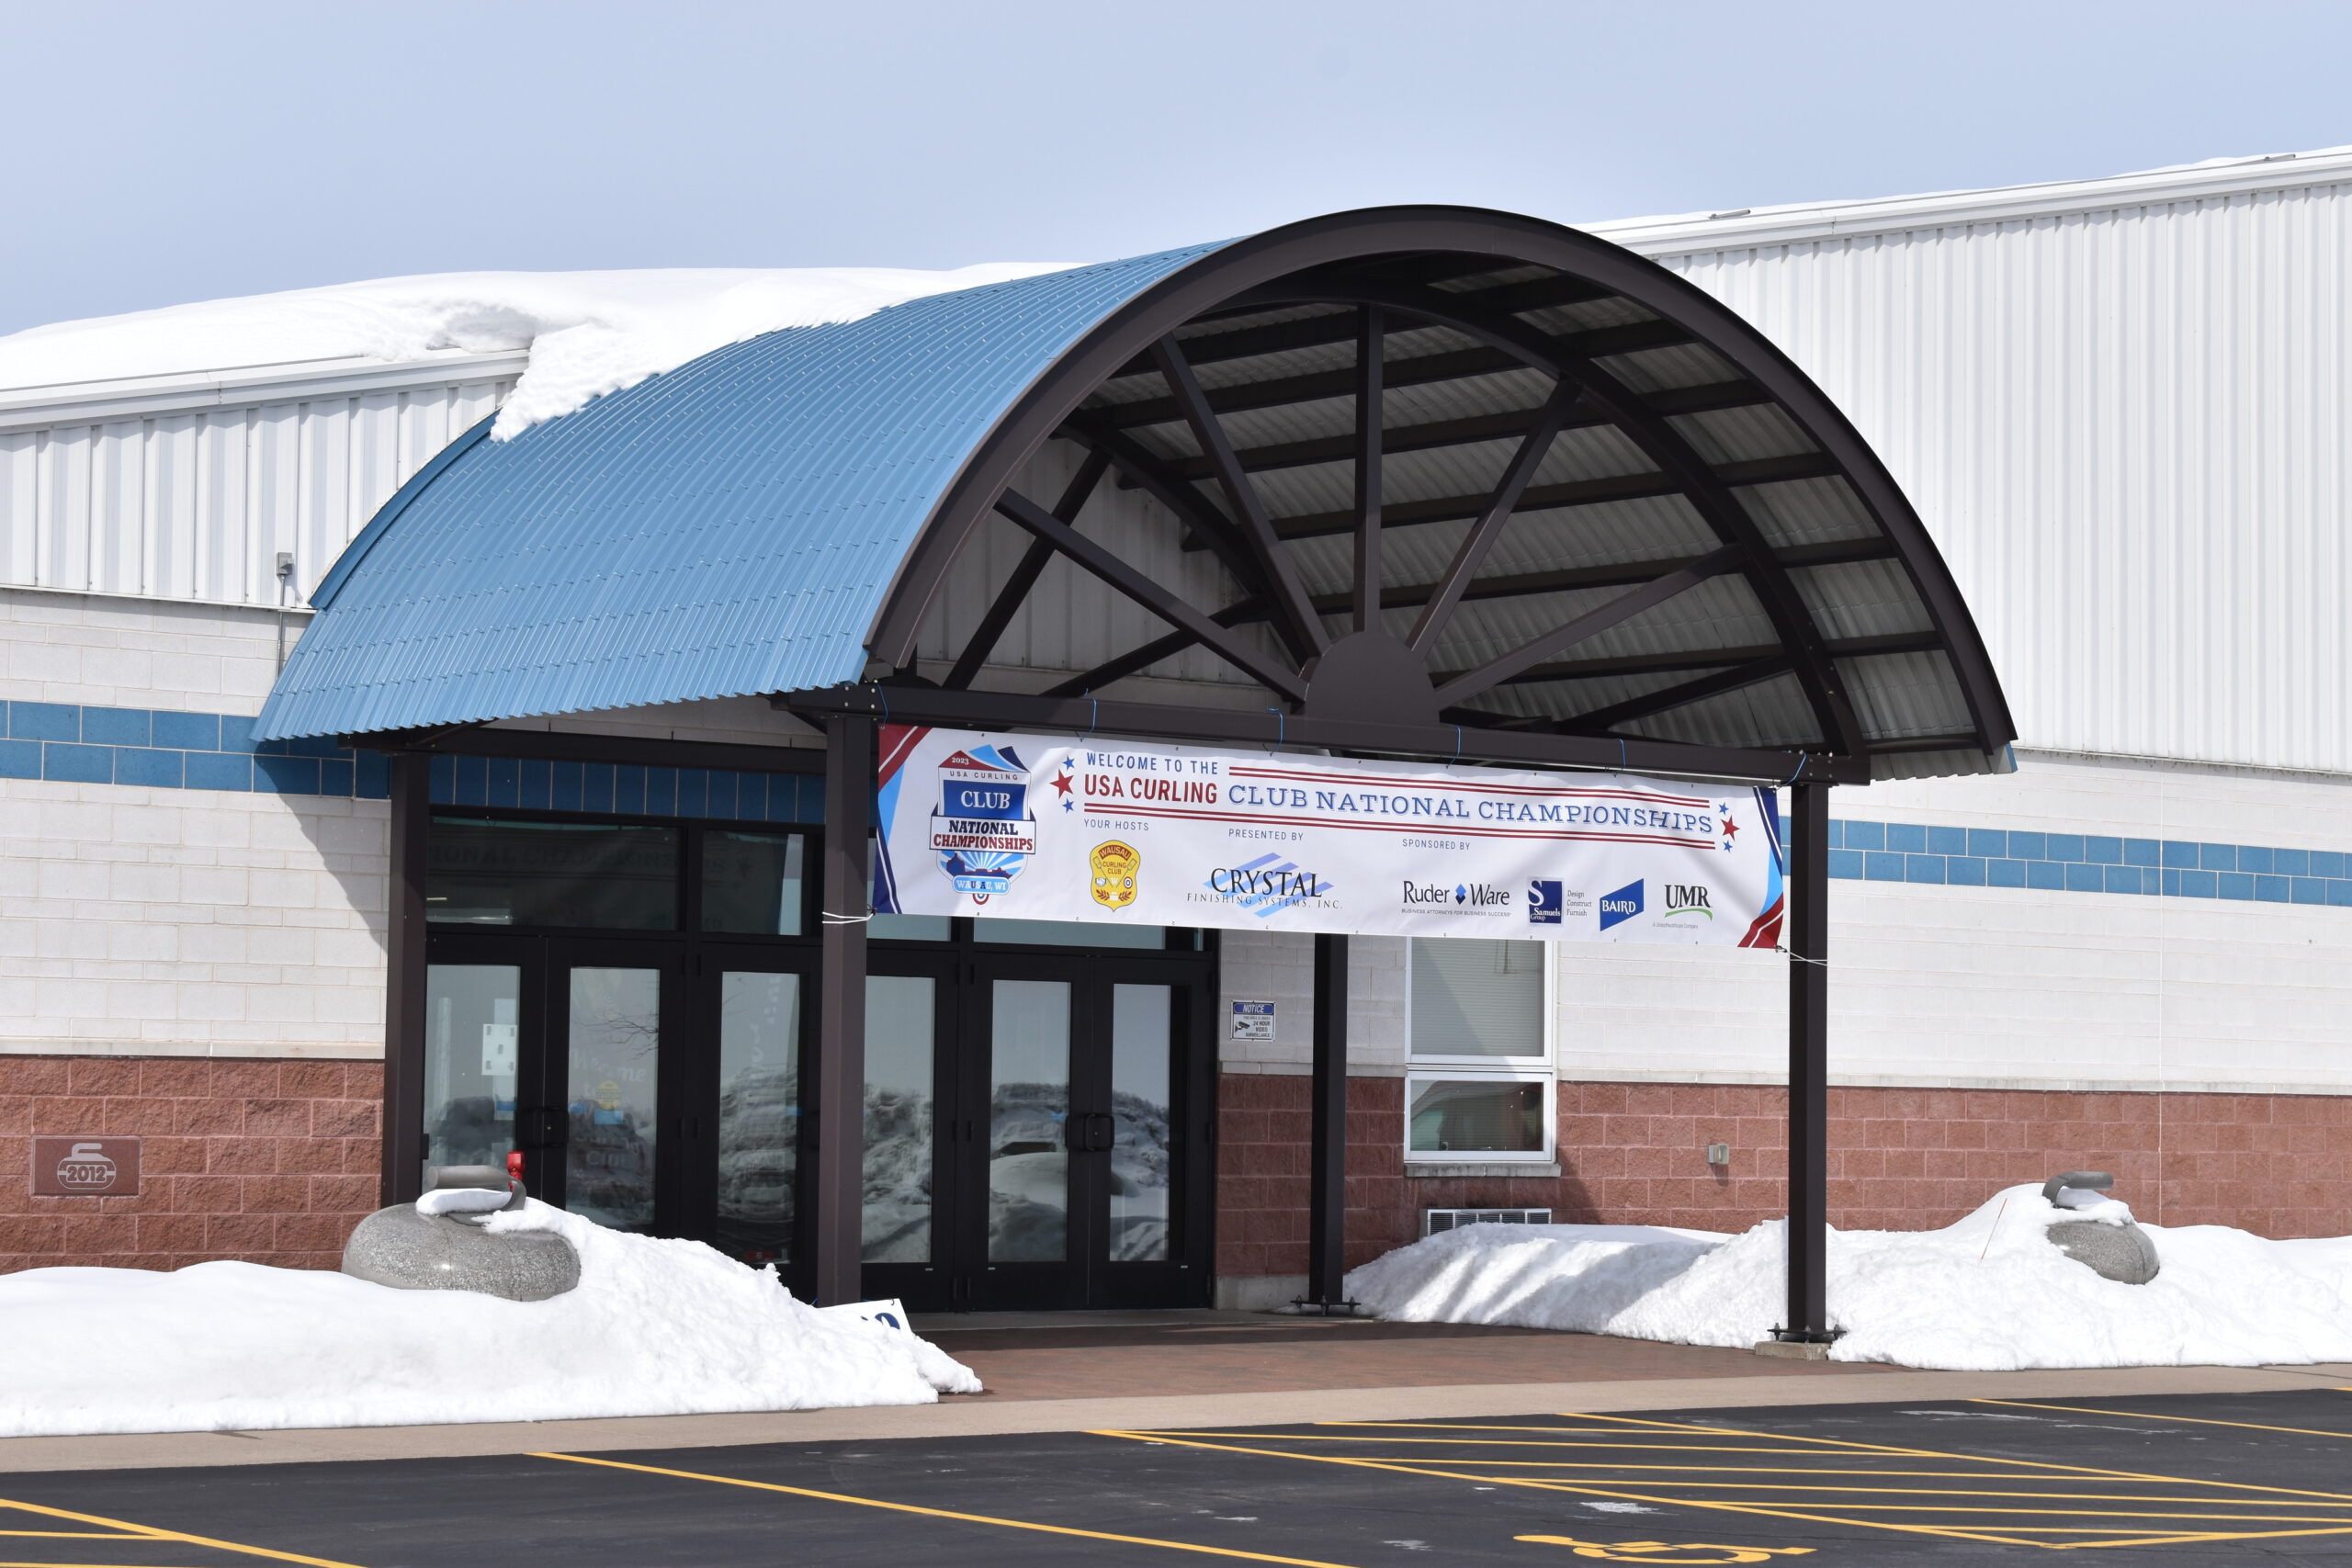 Built in 2012, the Wausau Curling Club's facility is among the largest in the nation